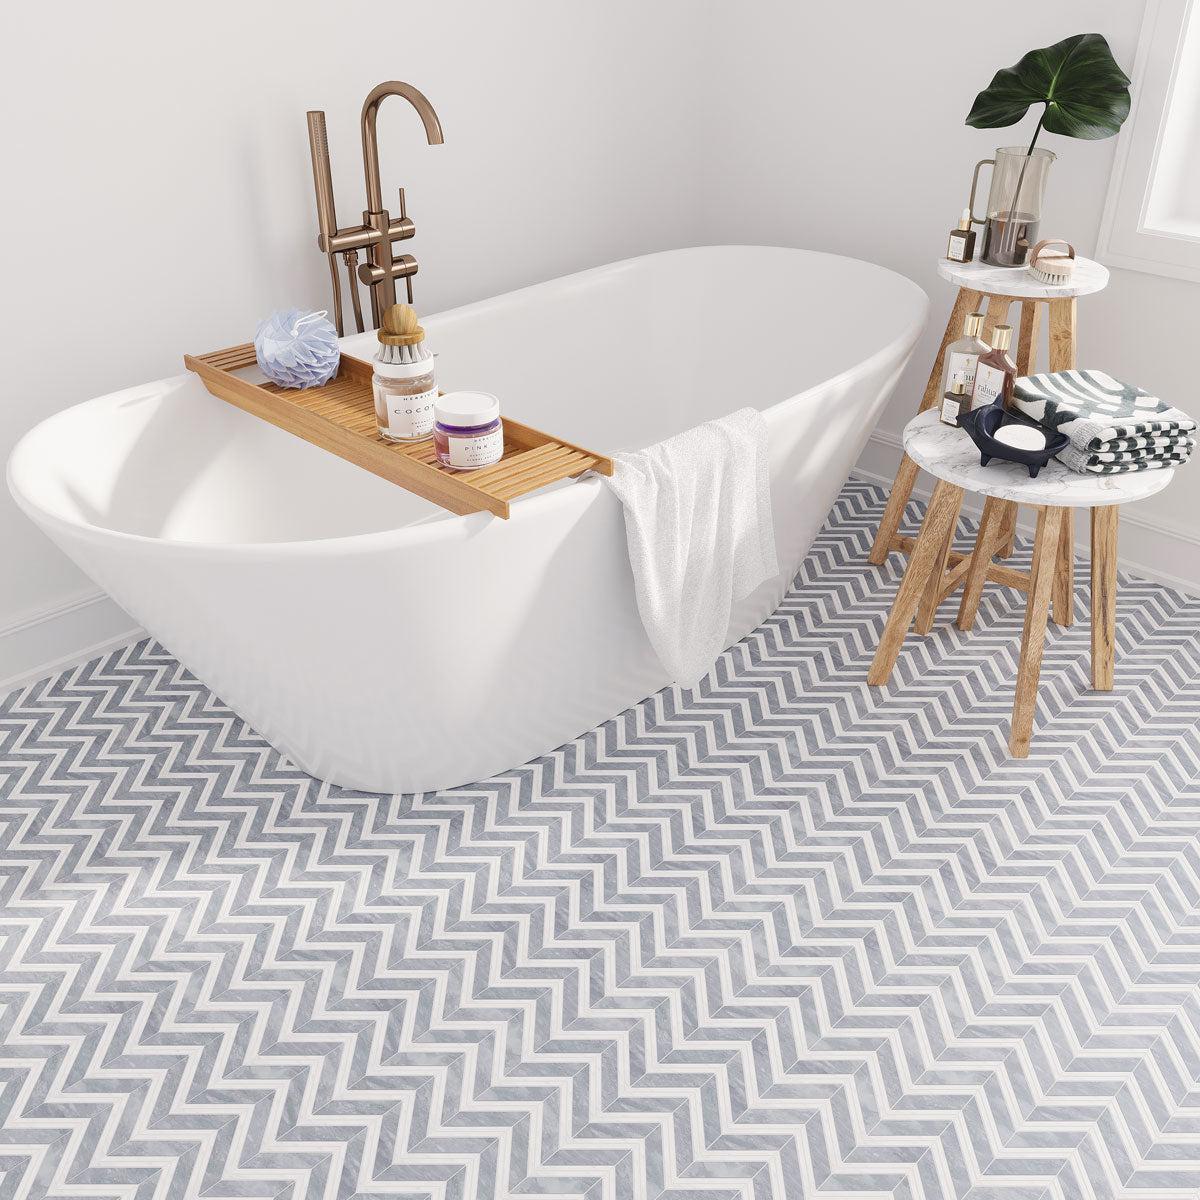 Standing Bathtub with a marble mosaic bathroom floor for extra grip